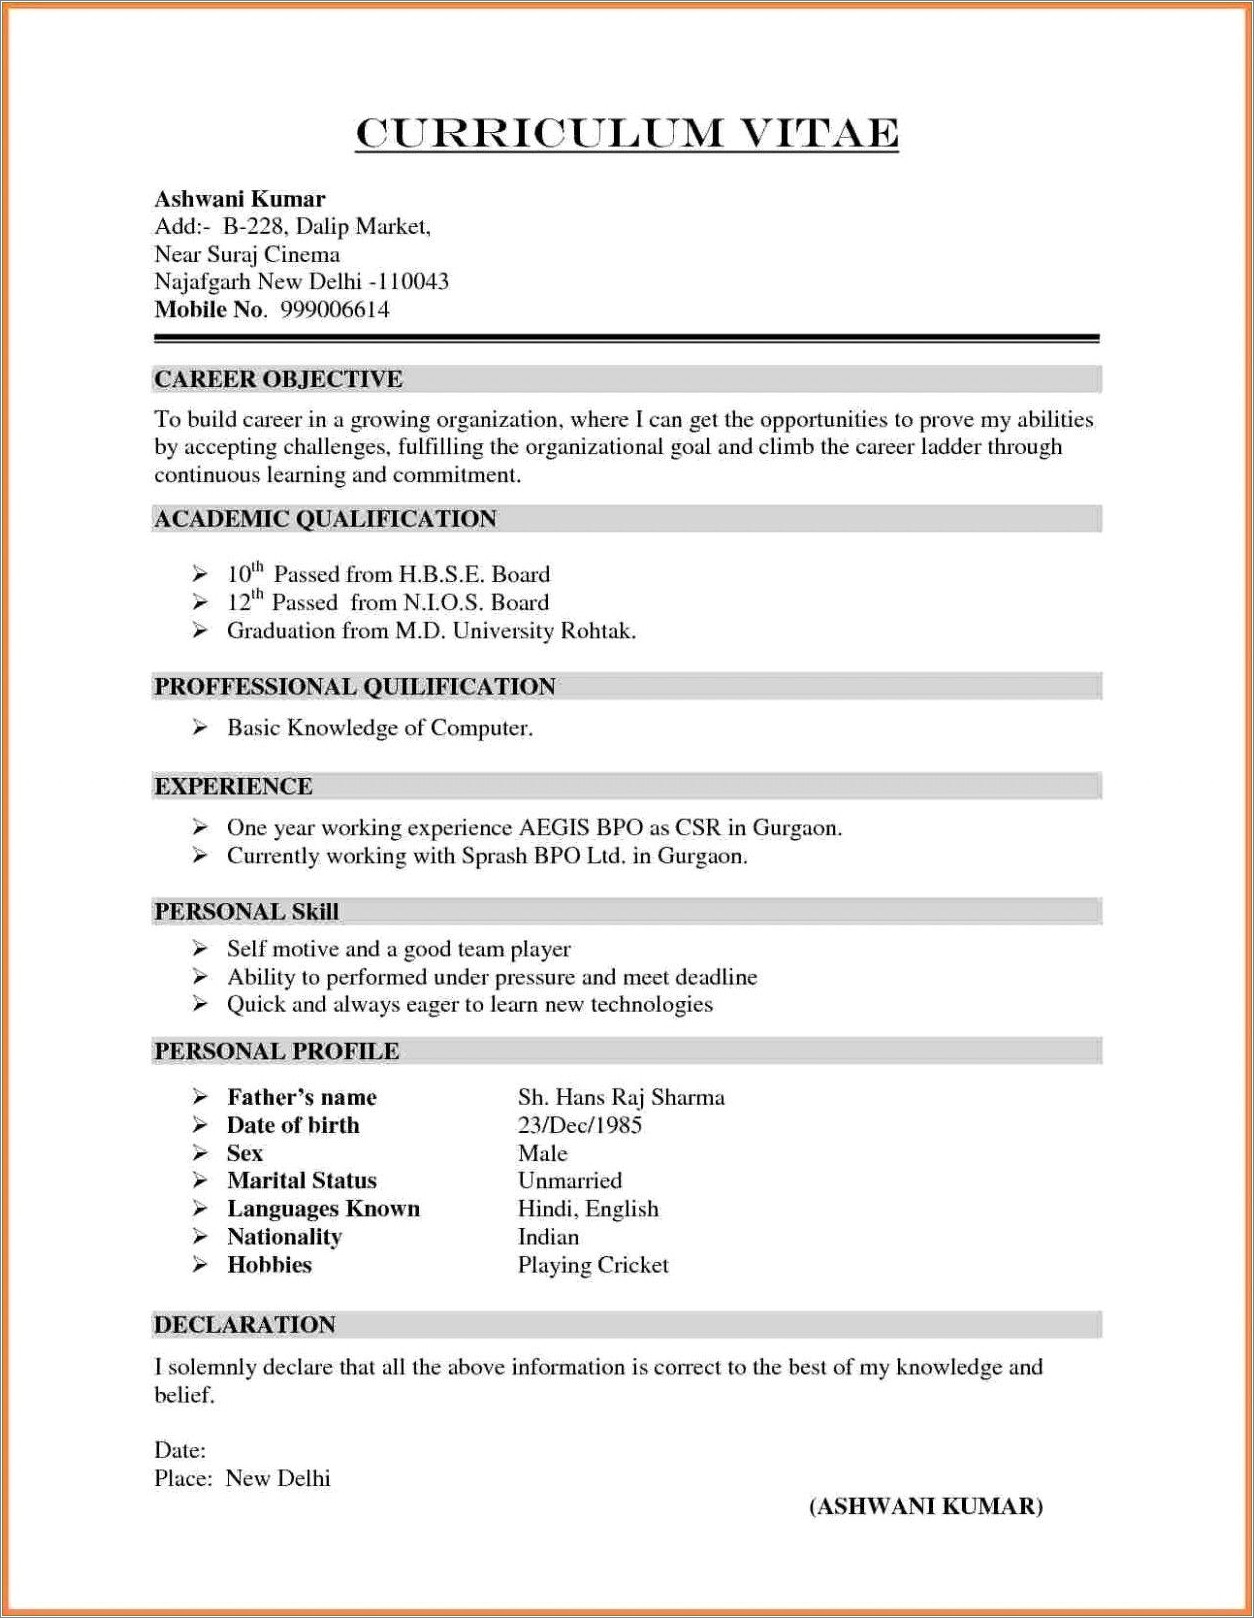 Engineering Career Objectives For A Resume